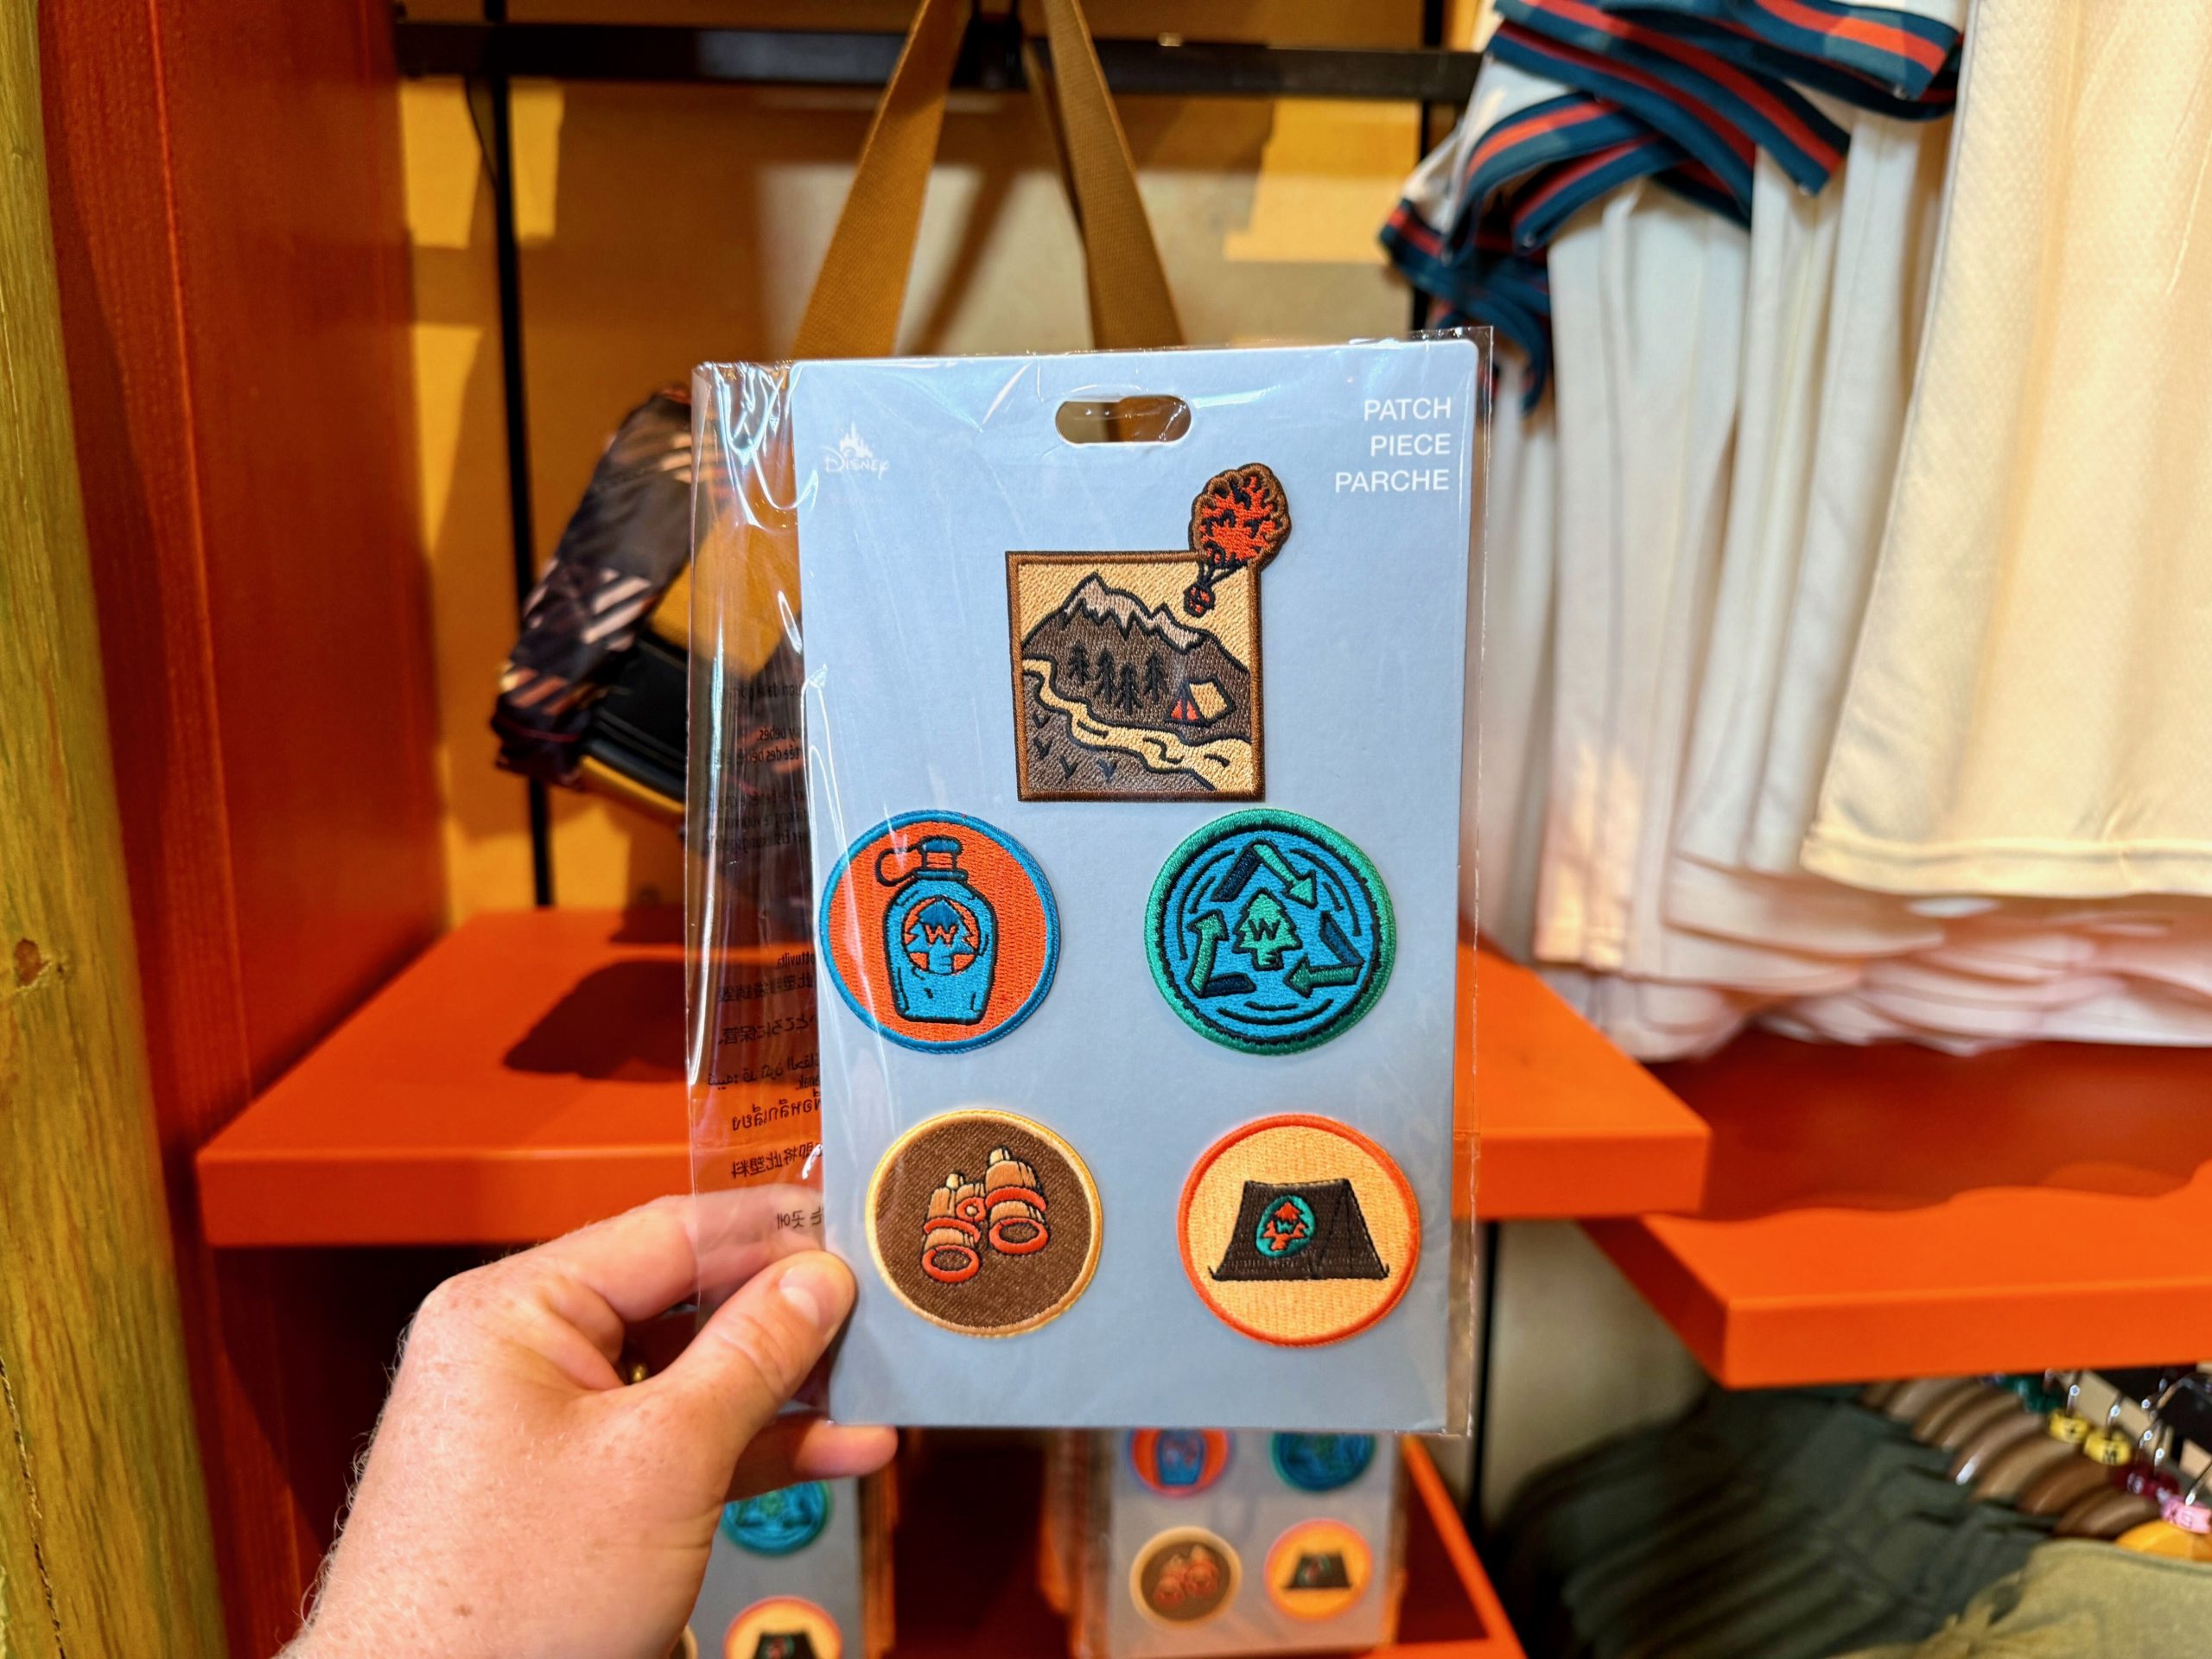 'UP' Patches at Disney's Animal Kingdom